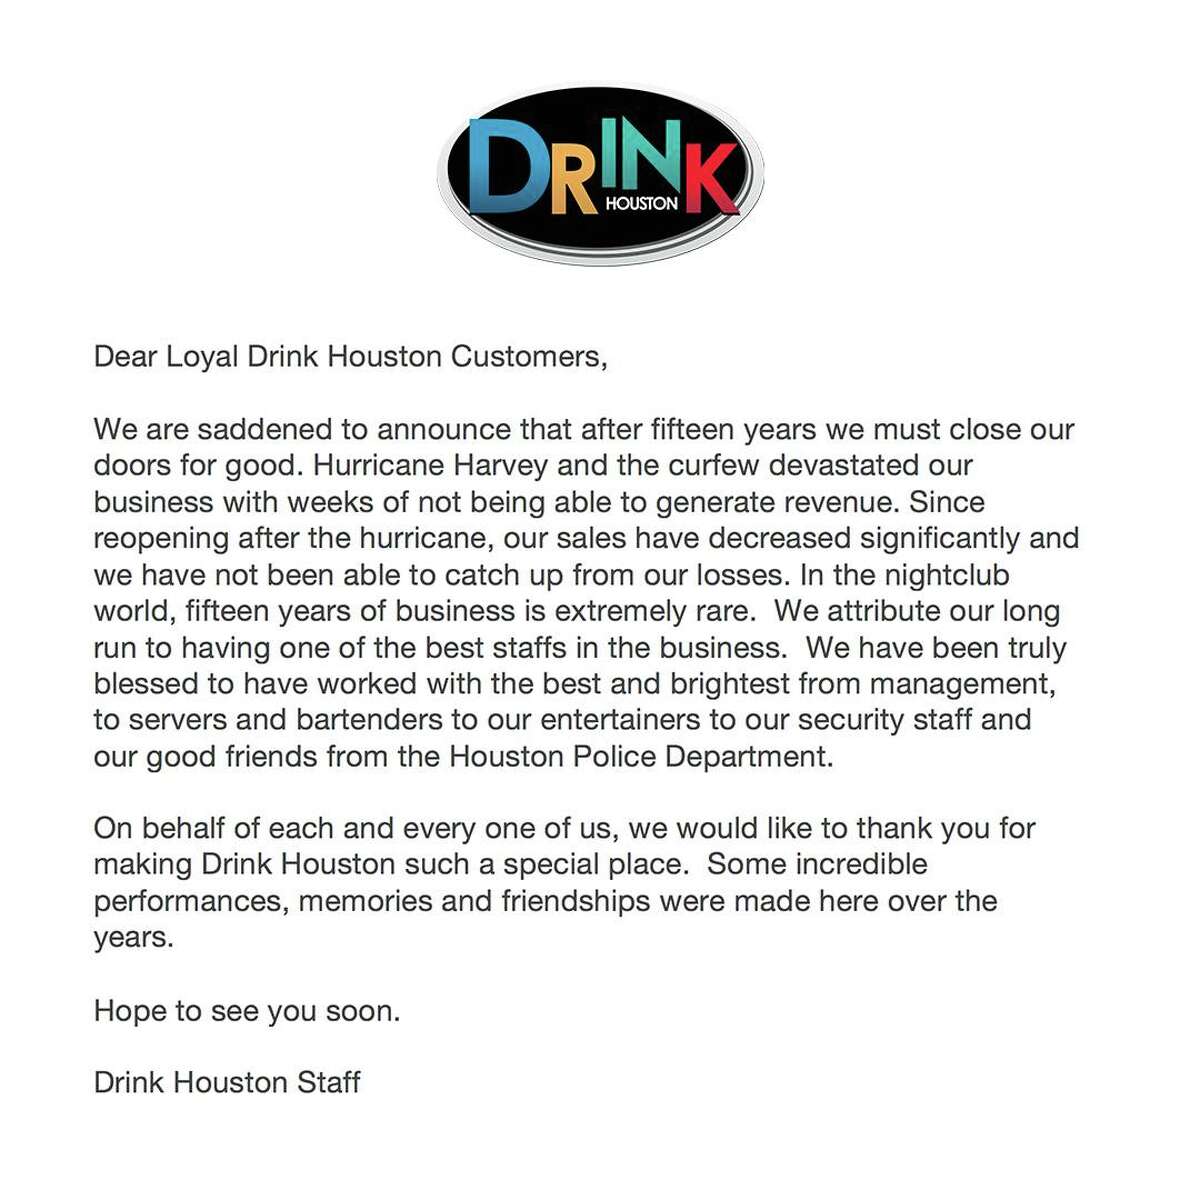 An official statement from DRINK Houston regarding its closure following Hurricane Harvey on Sept. 18, 2017. The owners of the popular nightclub blamed the storm and the city's resulting curfew for its demise. See more restaurants and bars that closed this year.